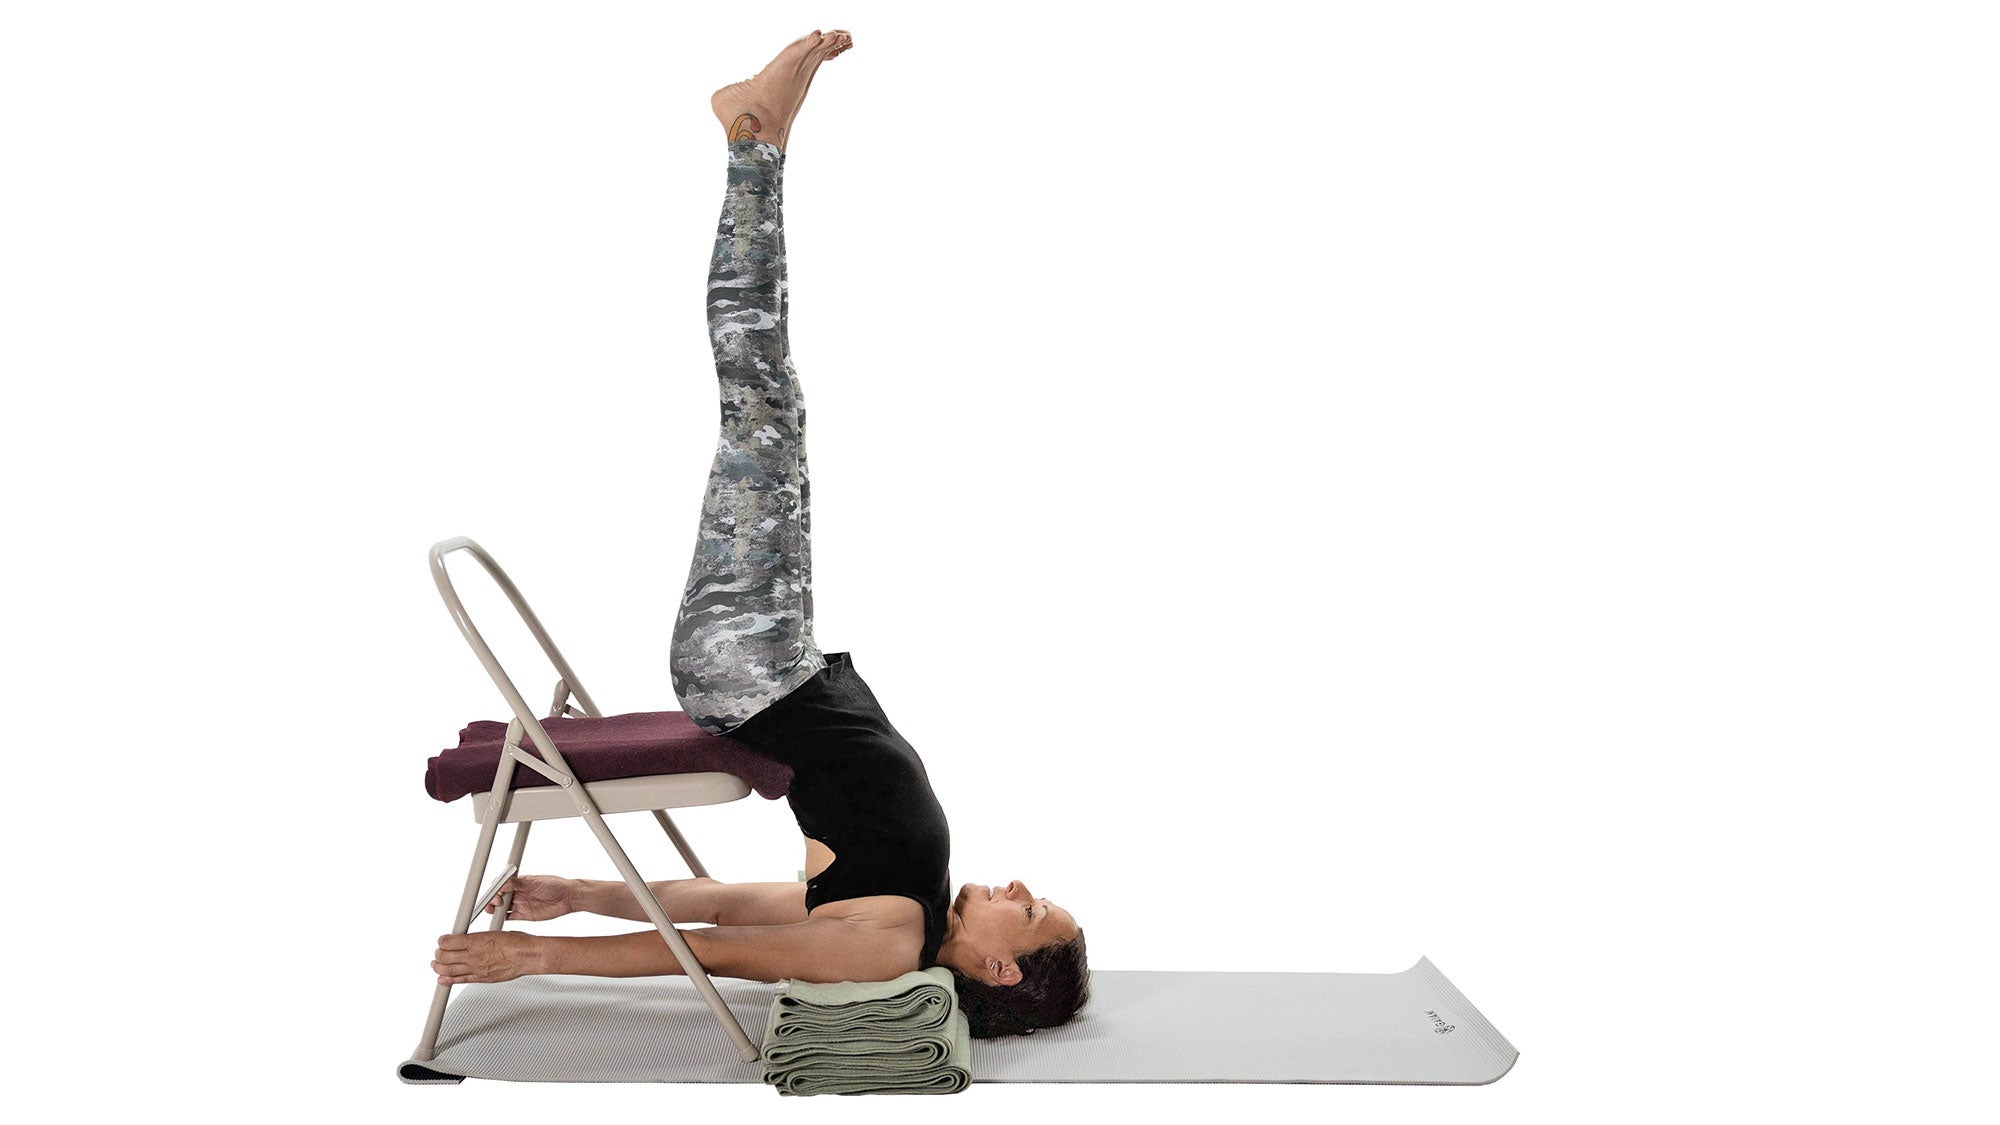 Premium Photo | Flexible woman doing yoga in supported shoulder stand pose  while balancing upside down on mat